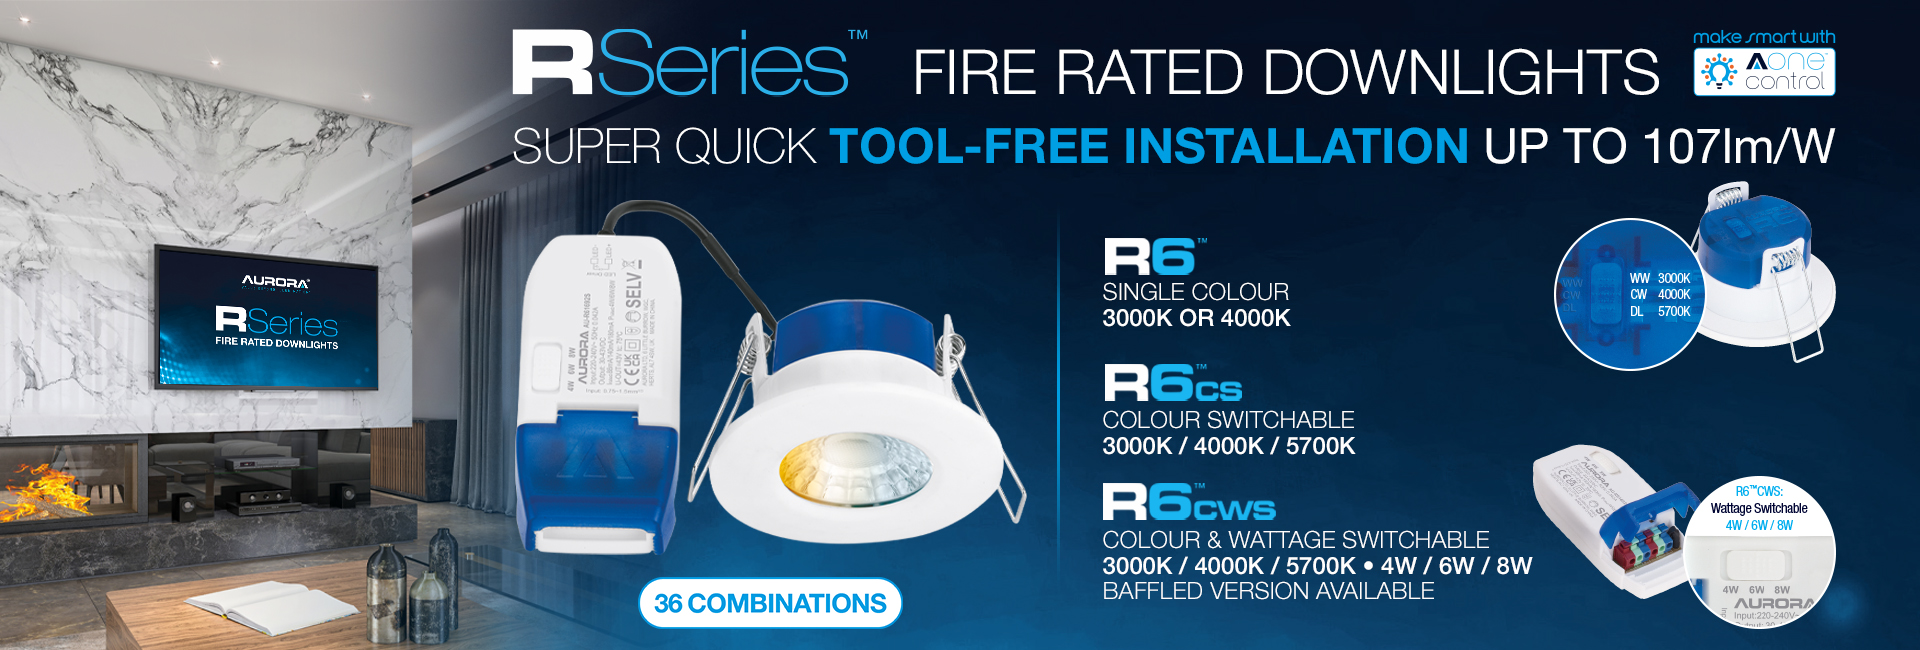 Show products in category Why is the RSeries™ a Popular Fire Rated Downlight Range?